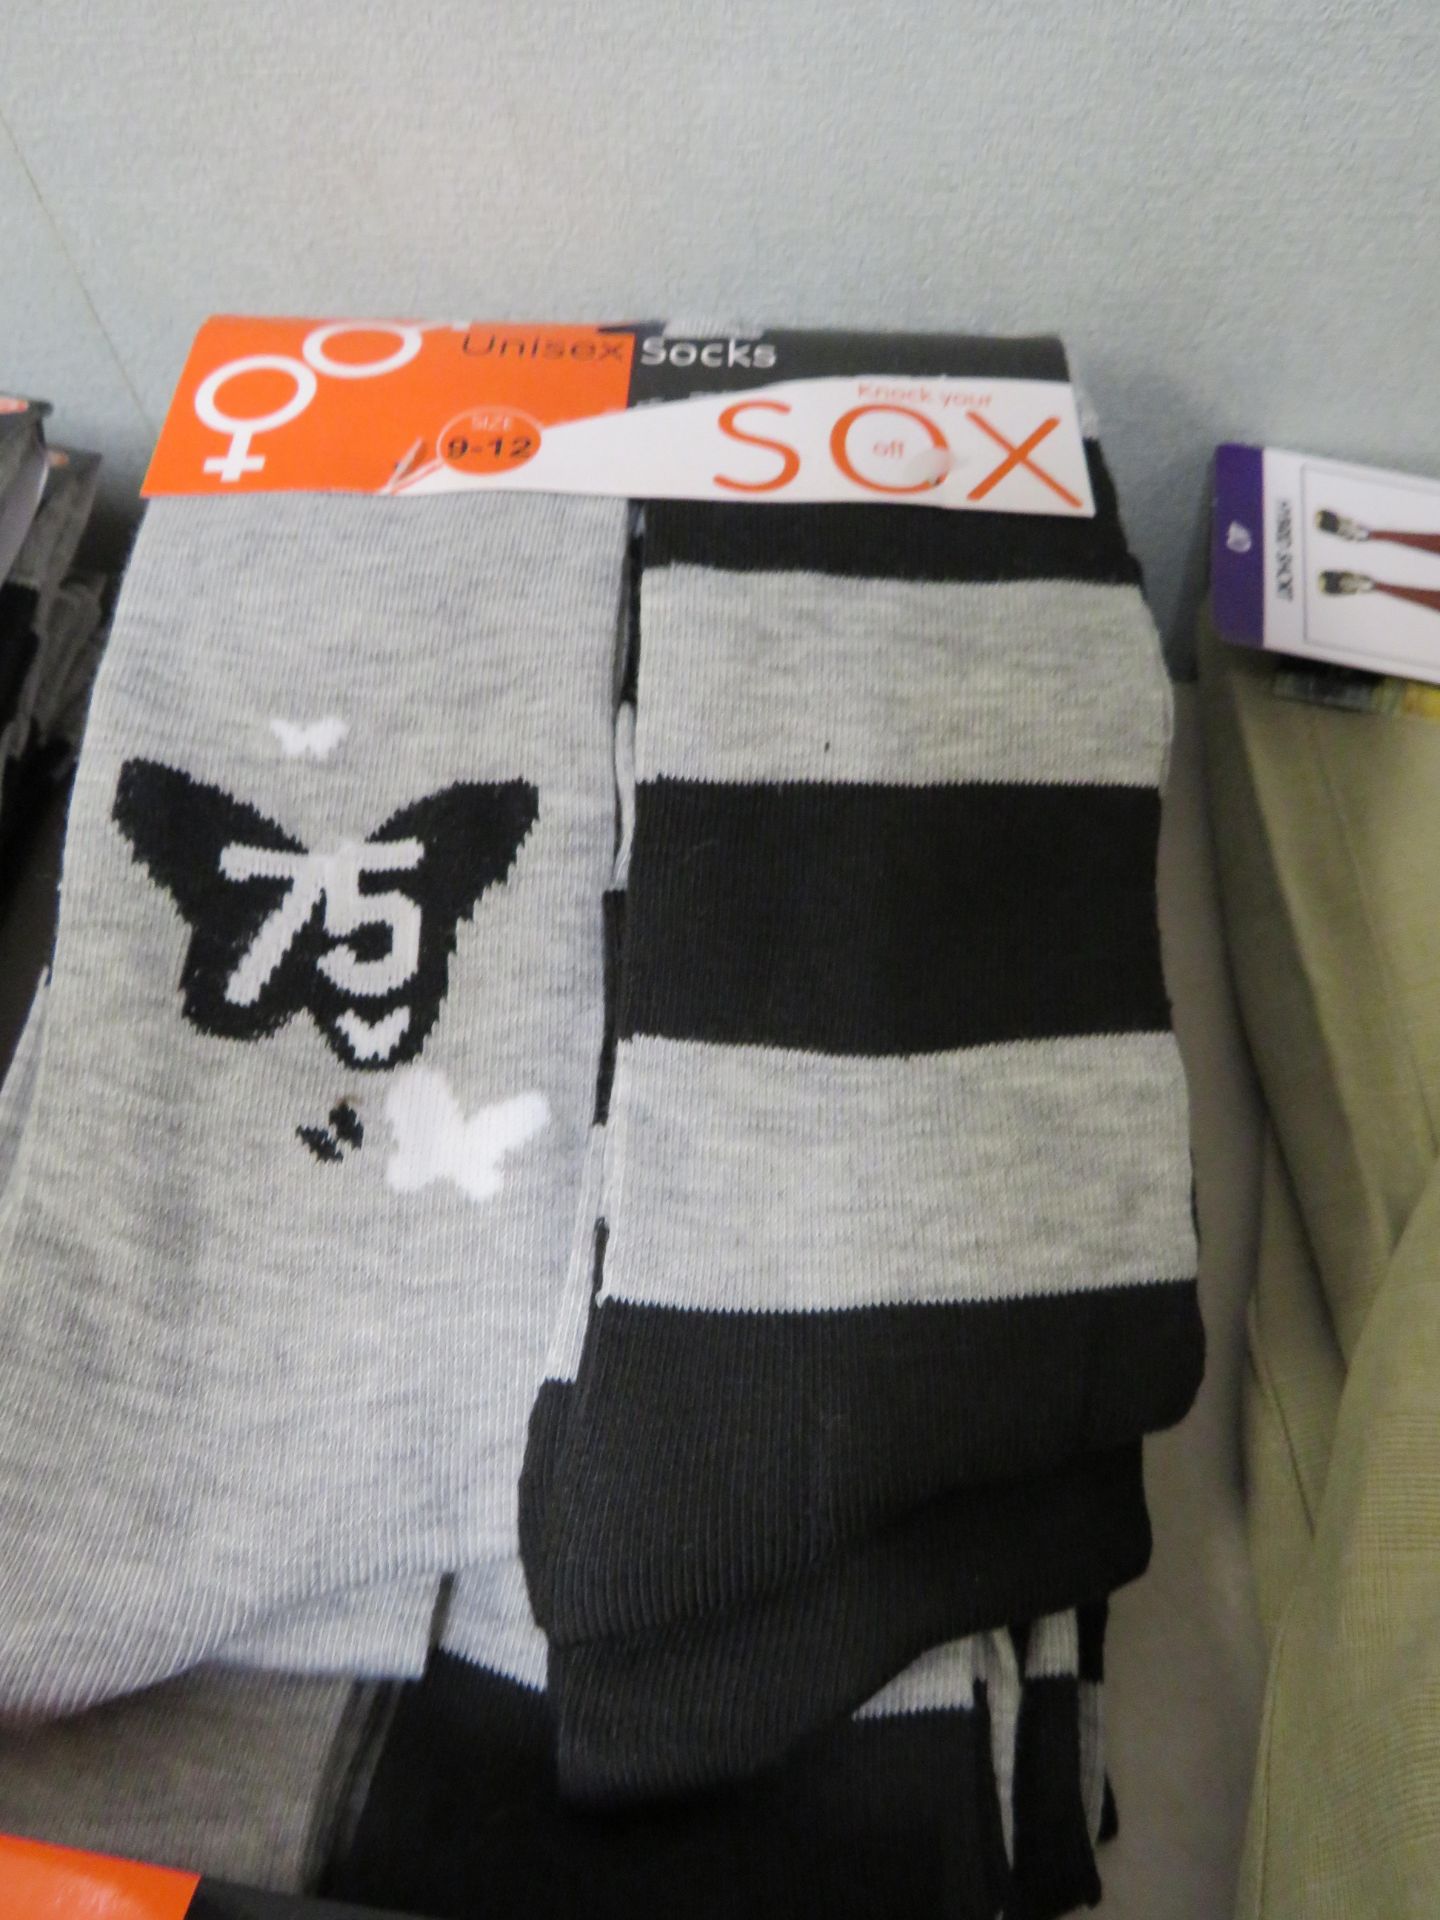 12 x pairs of Unisex Socks size 9-12 new & packaged